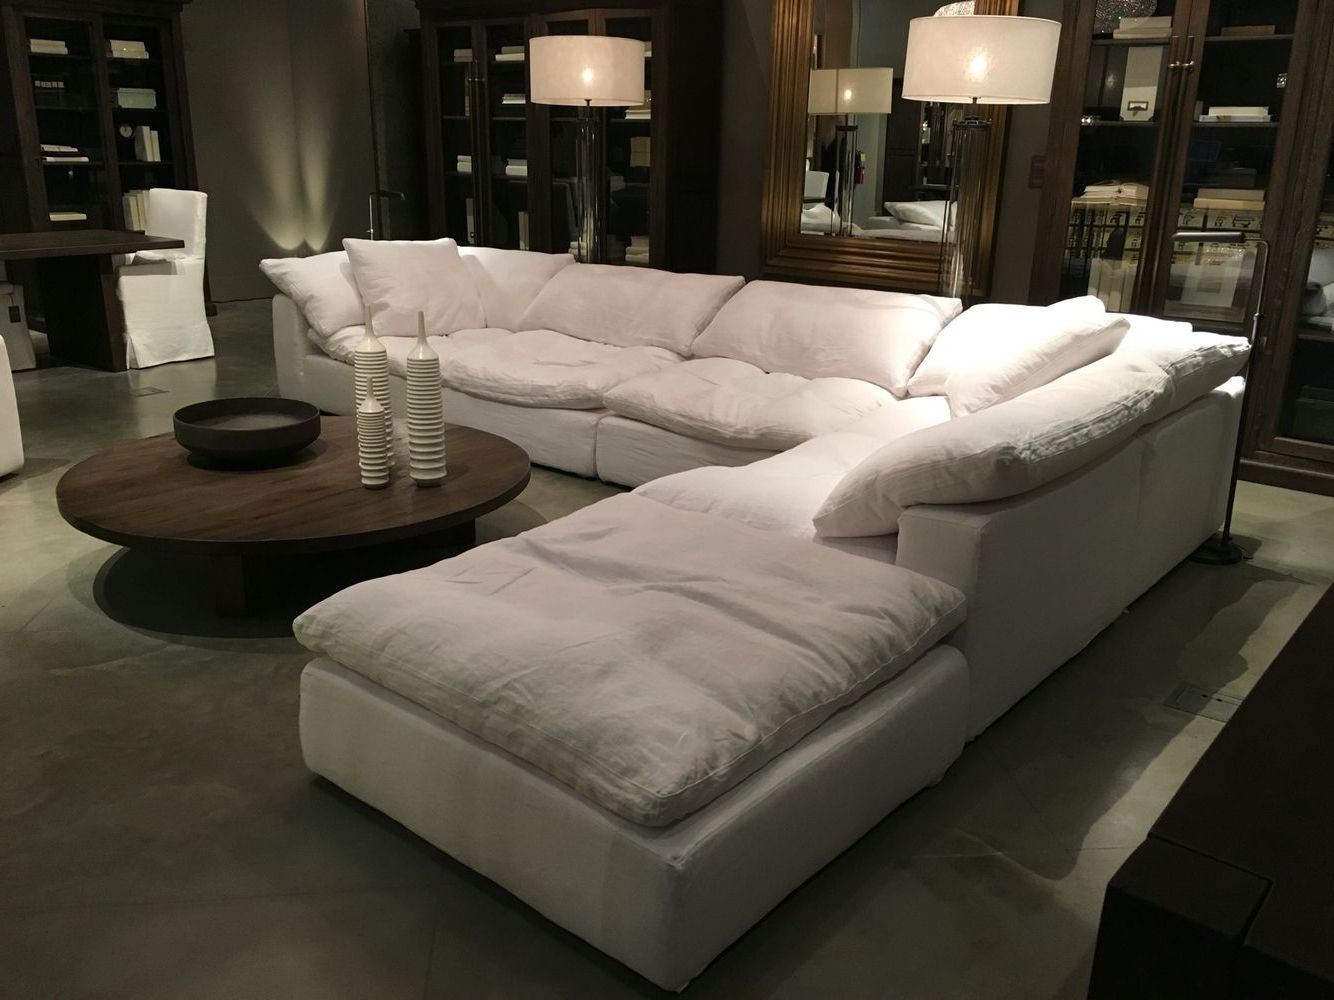 [%restoration Hardware Sectional "cloud" Couch | [future Home With Most Popular Comfortable Sectional Sofas|comfortable Sectional Sofas Intended For Most Popular Restoration Hardware Sectional "cloud" Couch | [future Home|popular Comfortable Sectional Sofas Intended For Restoration Hardware Sectional "cloud" Couch | [future Home|preferred Restoration Hardware Sectional "cloud" Couch | [future Home Pertaining To Comfortable Sectional Sofas%] (Photo 11 of 15)